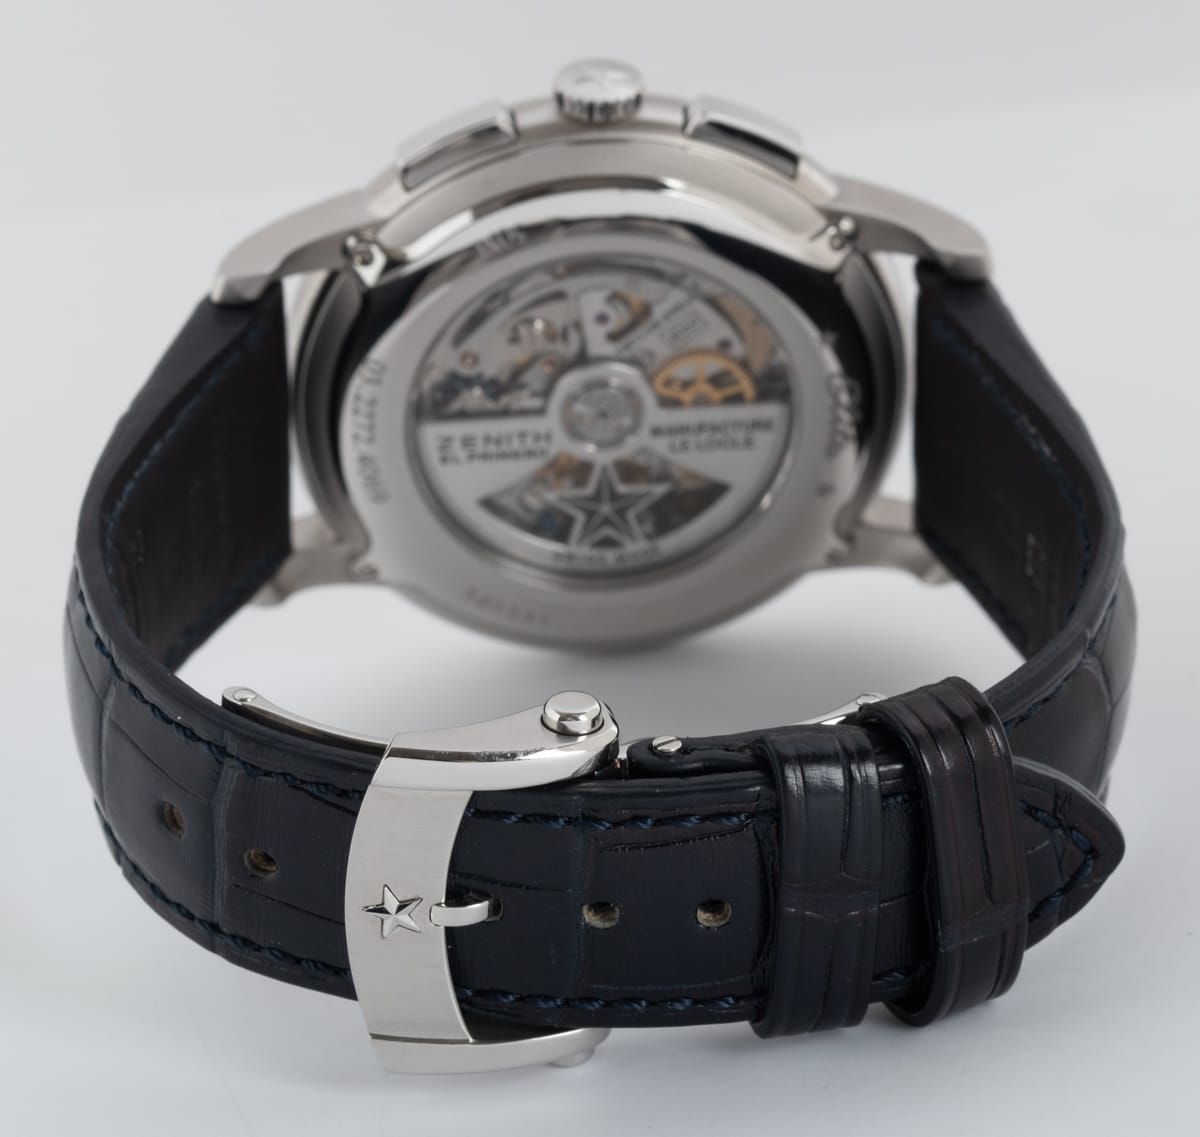 Rear / Band View of Elite Chronograph Classic